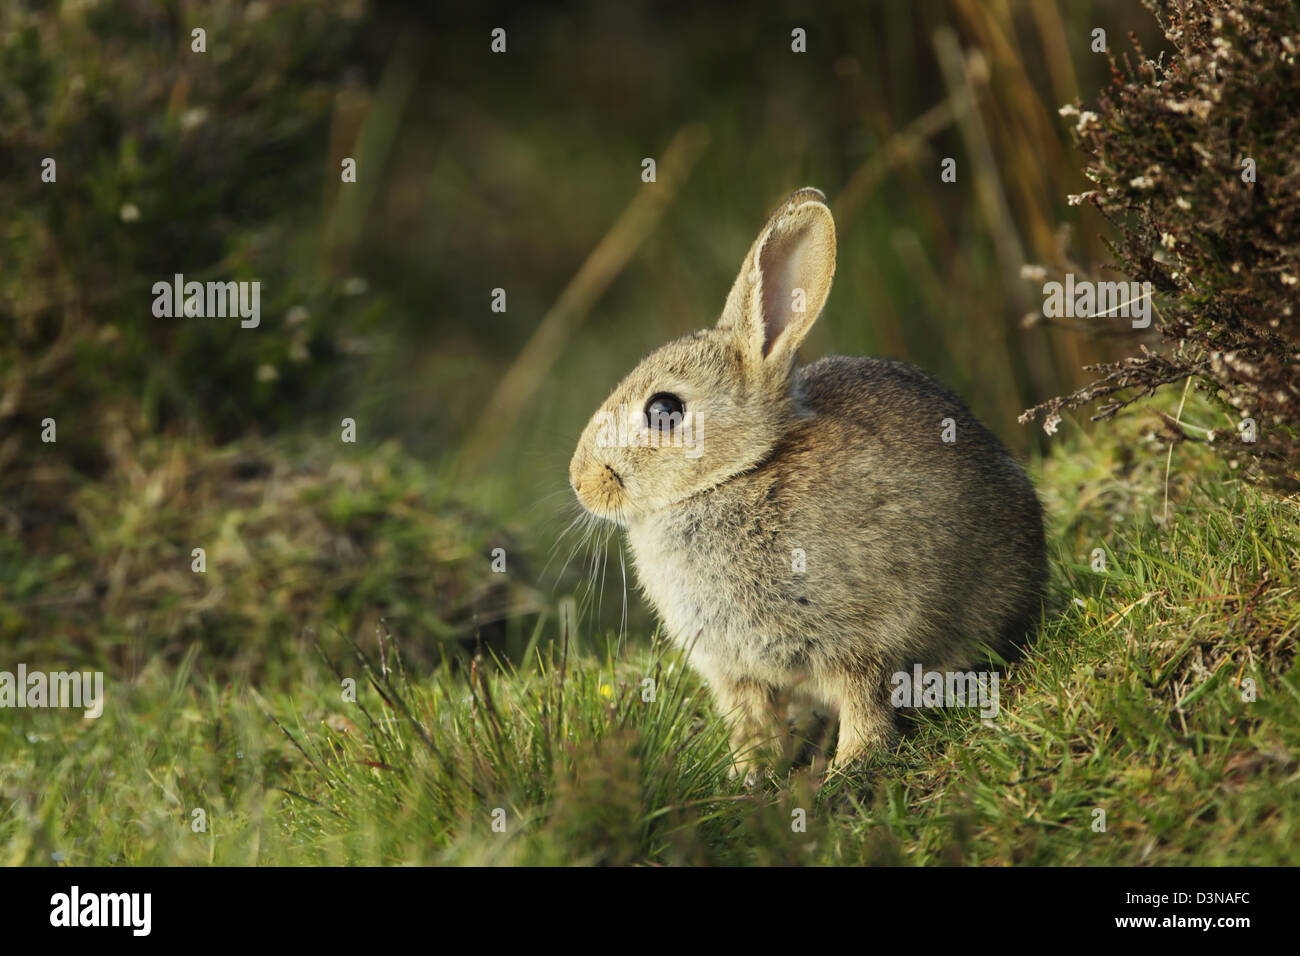 Young wild rabbit (Oryctolagus cuniculus) sitting on grass Stock Photo